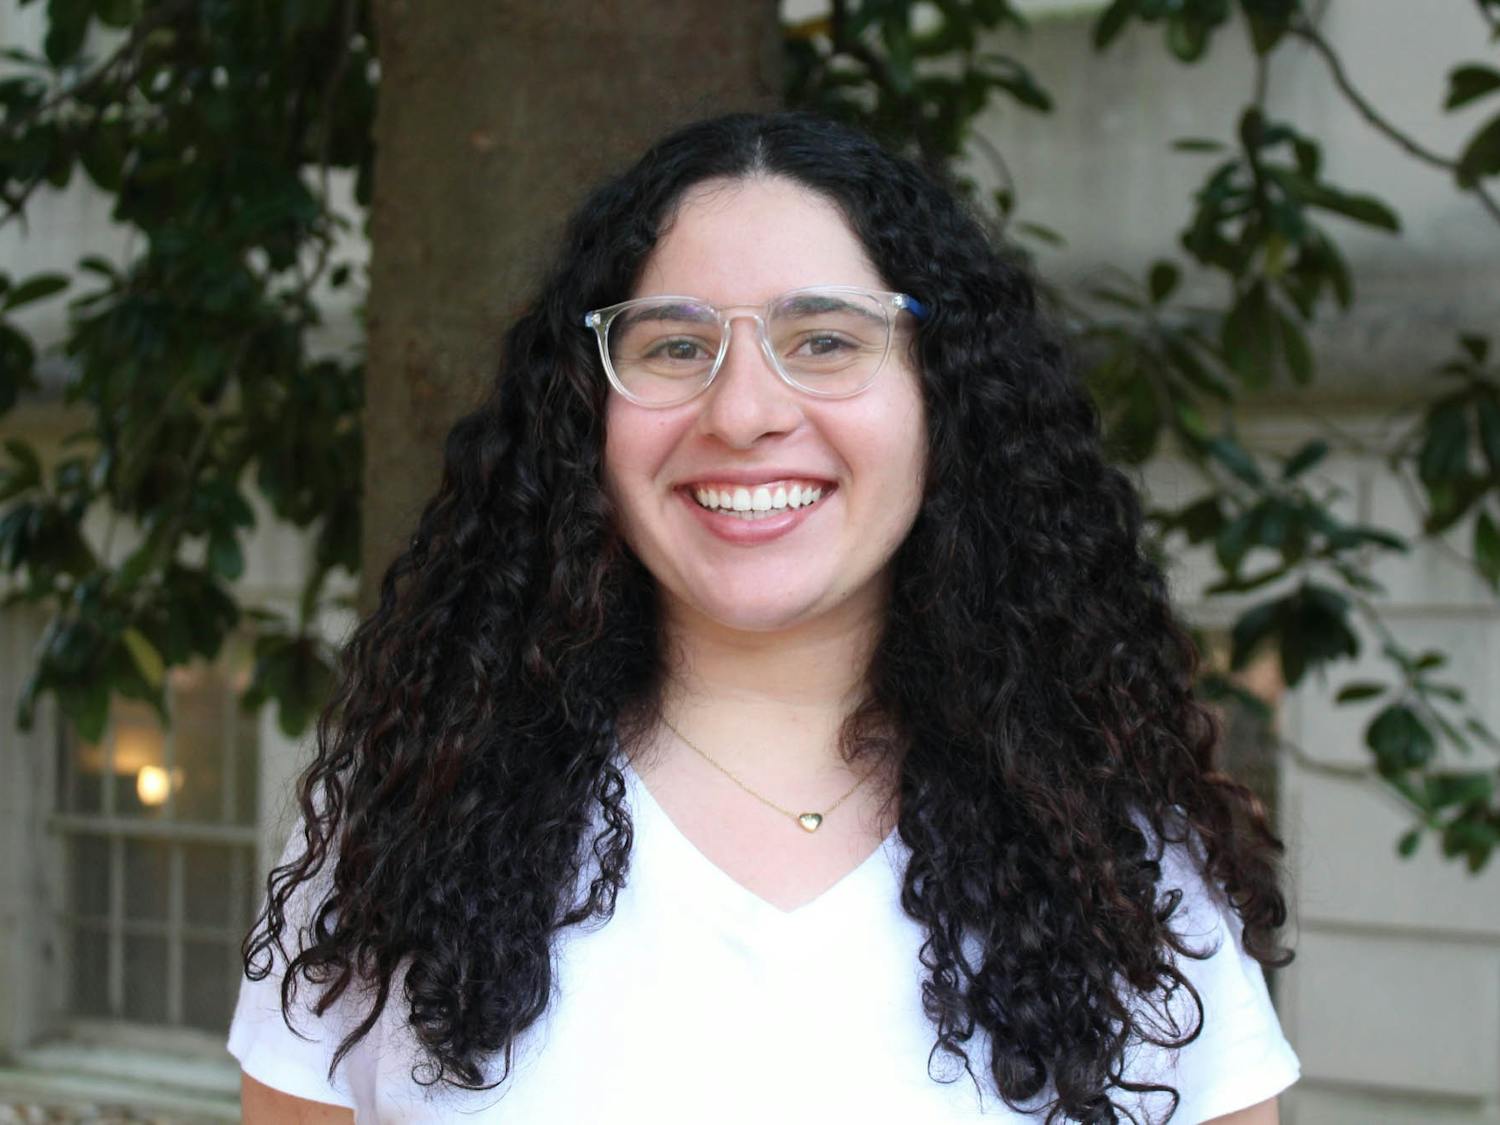 Senior Lissie Rivera is UNC's First-Generation Student Association (FGSA) President. FGSA works to "establish a sense of community on campus; there’s so many different identities that first-generation students have in addition to being first-gens” according to Rivera.